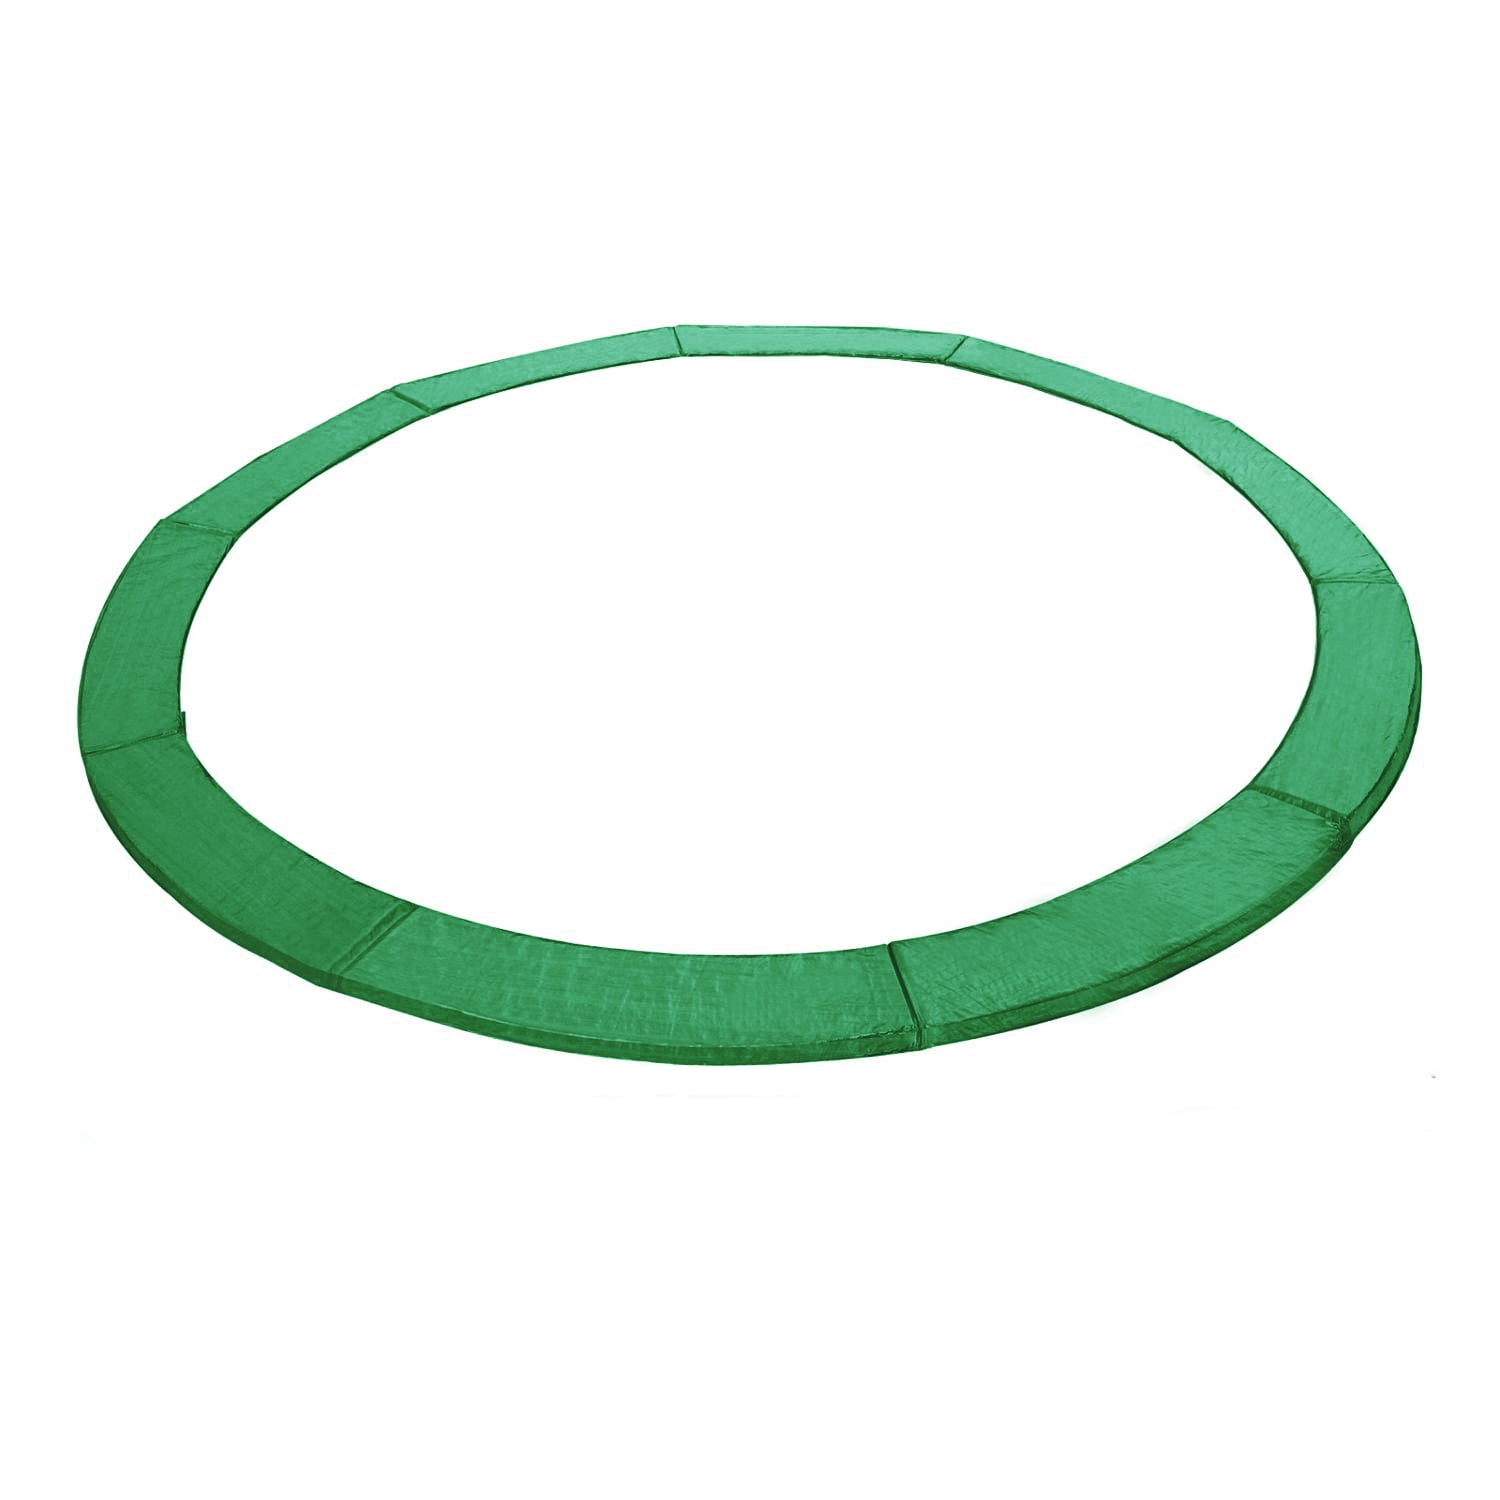 Safety Pad Spring Round Frame Pad Cover Replacement 12FT TrampolineMulti Color 